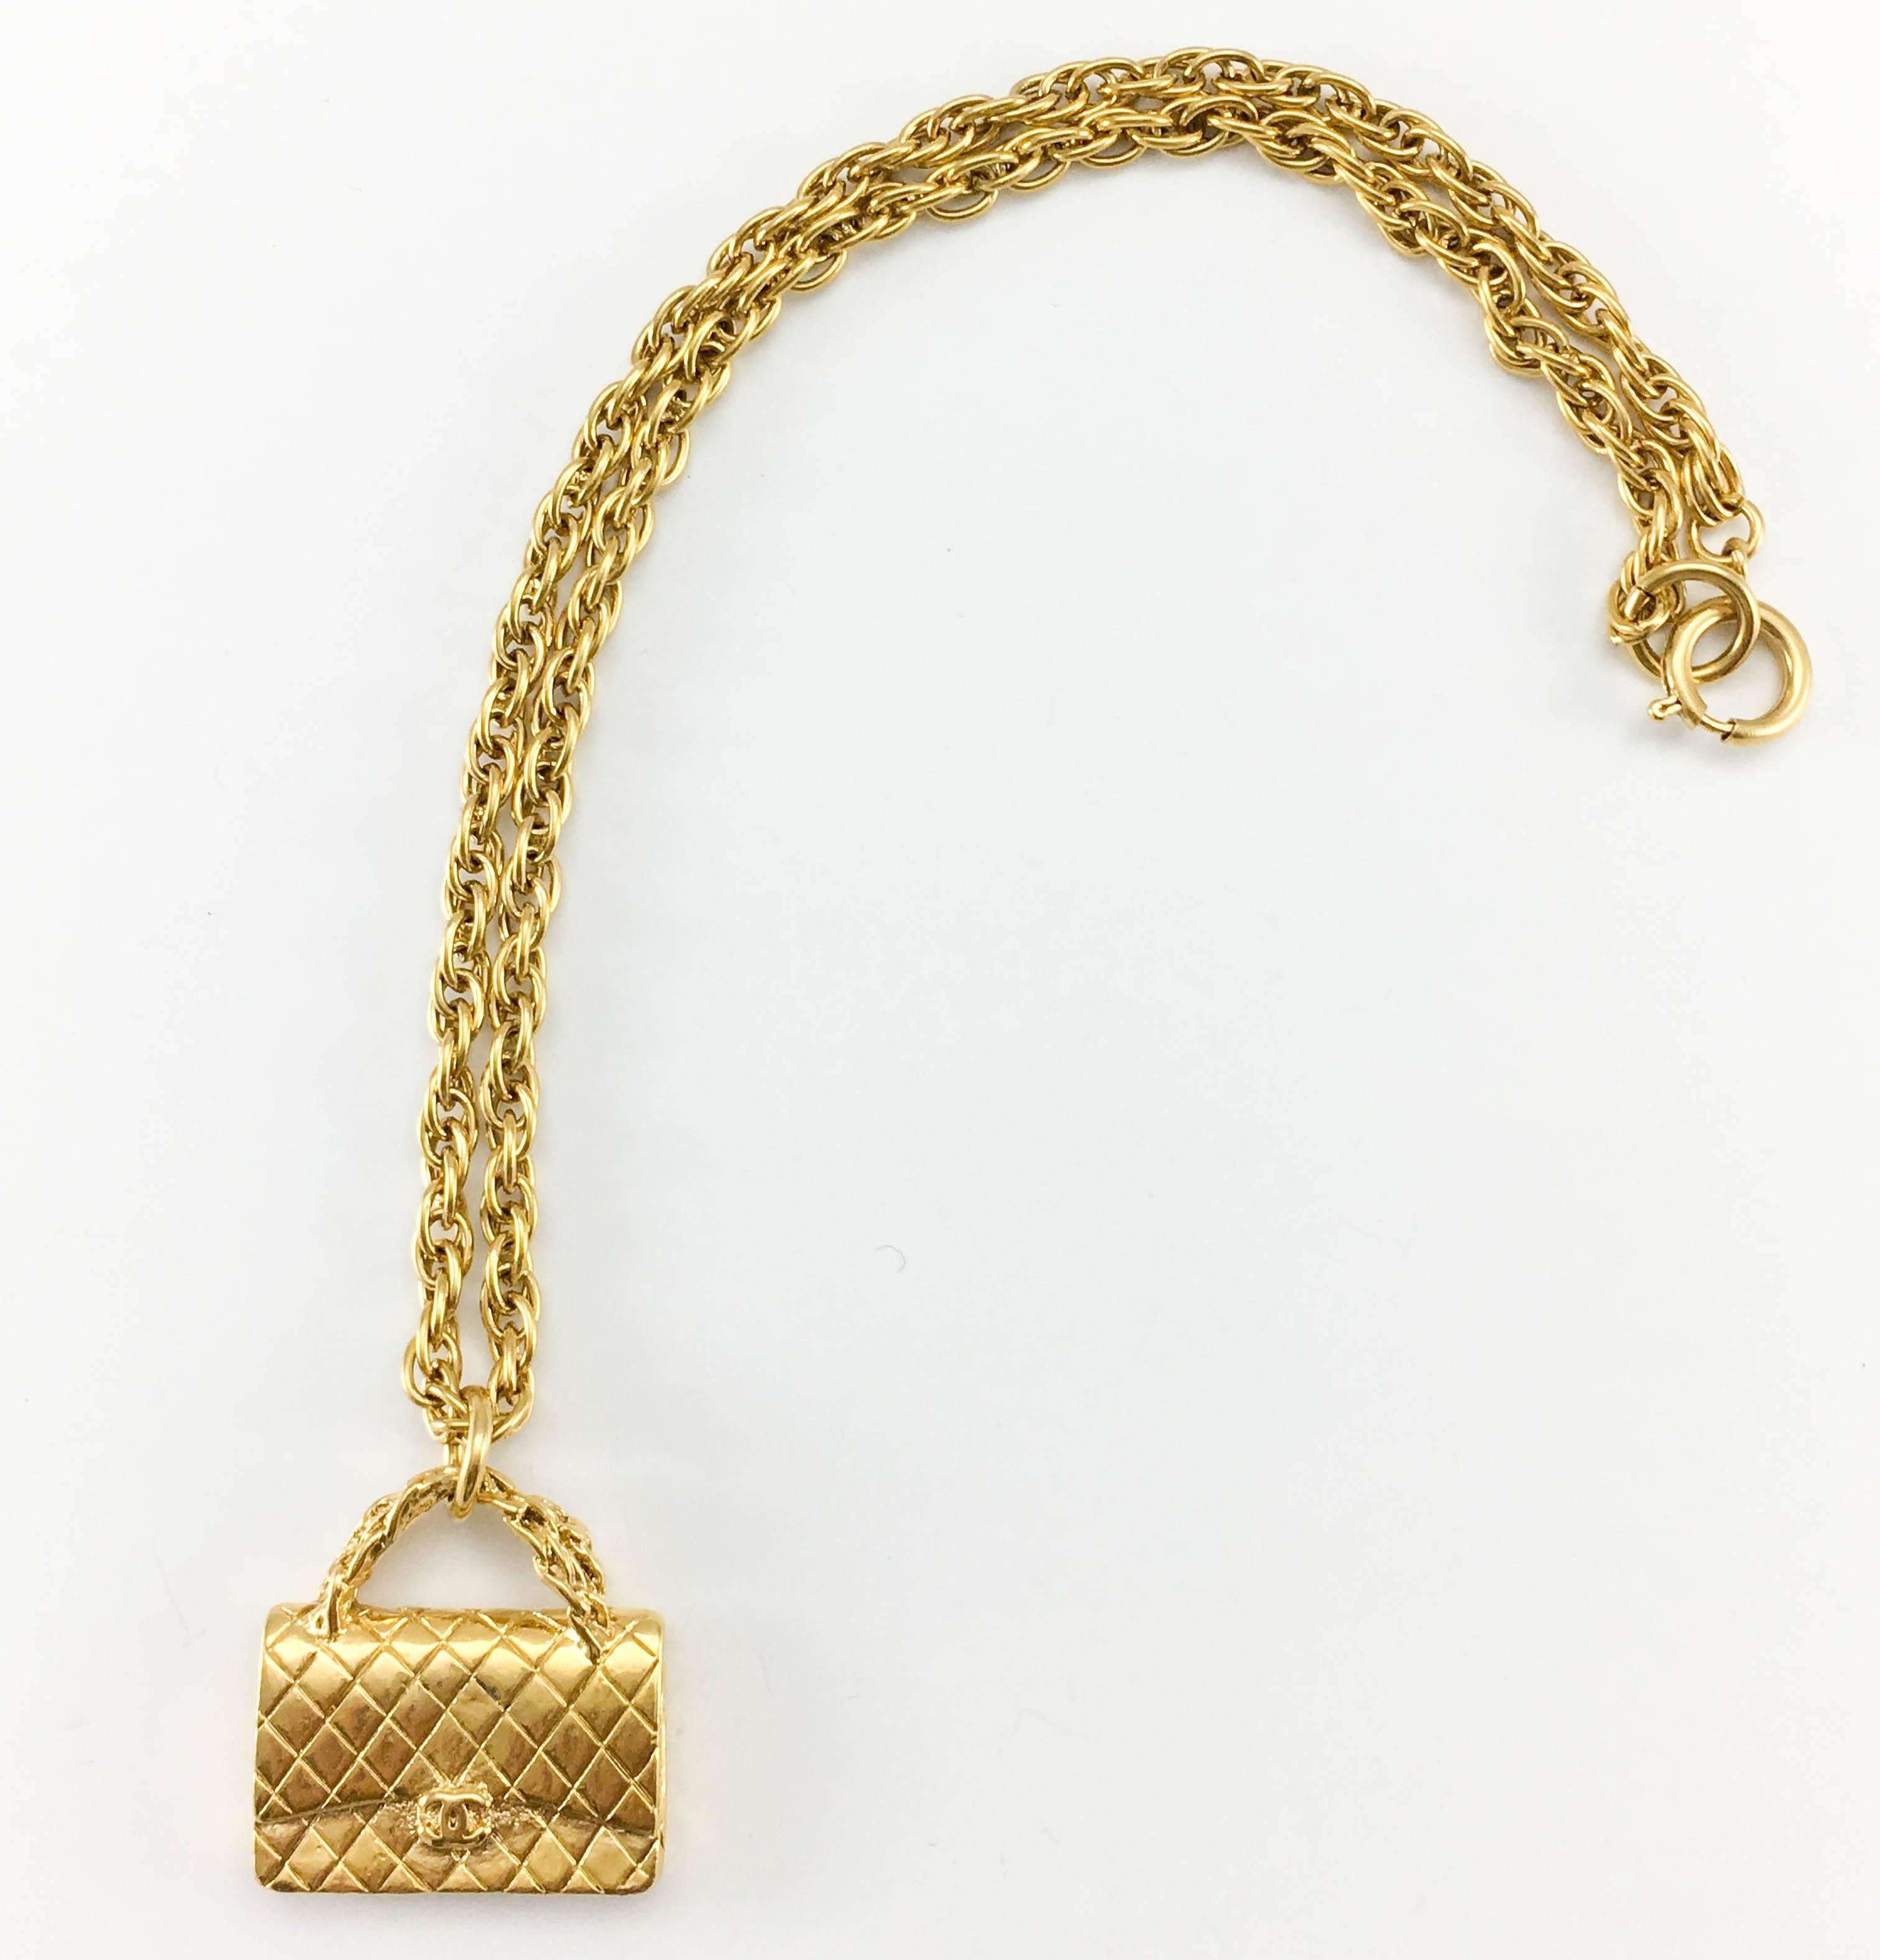 Women's 1994 Chanel Gold-Plated 2.55 Quilted Handbag Pendant Necklace For Sale